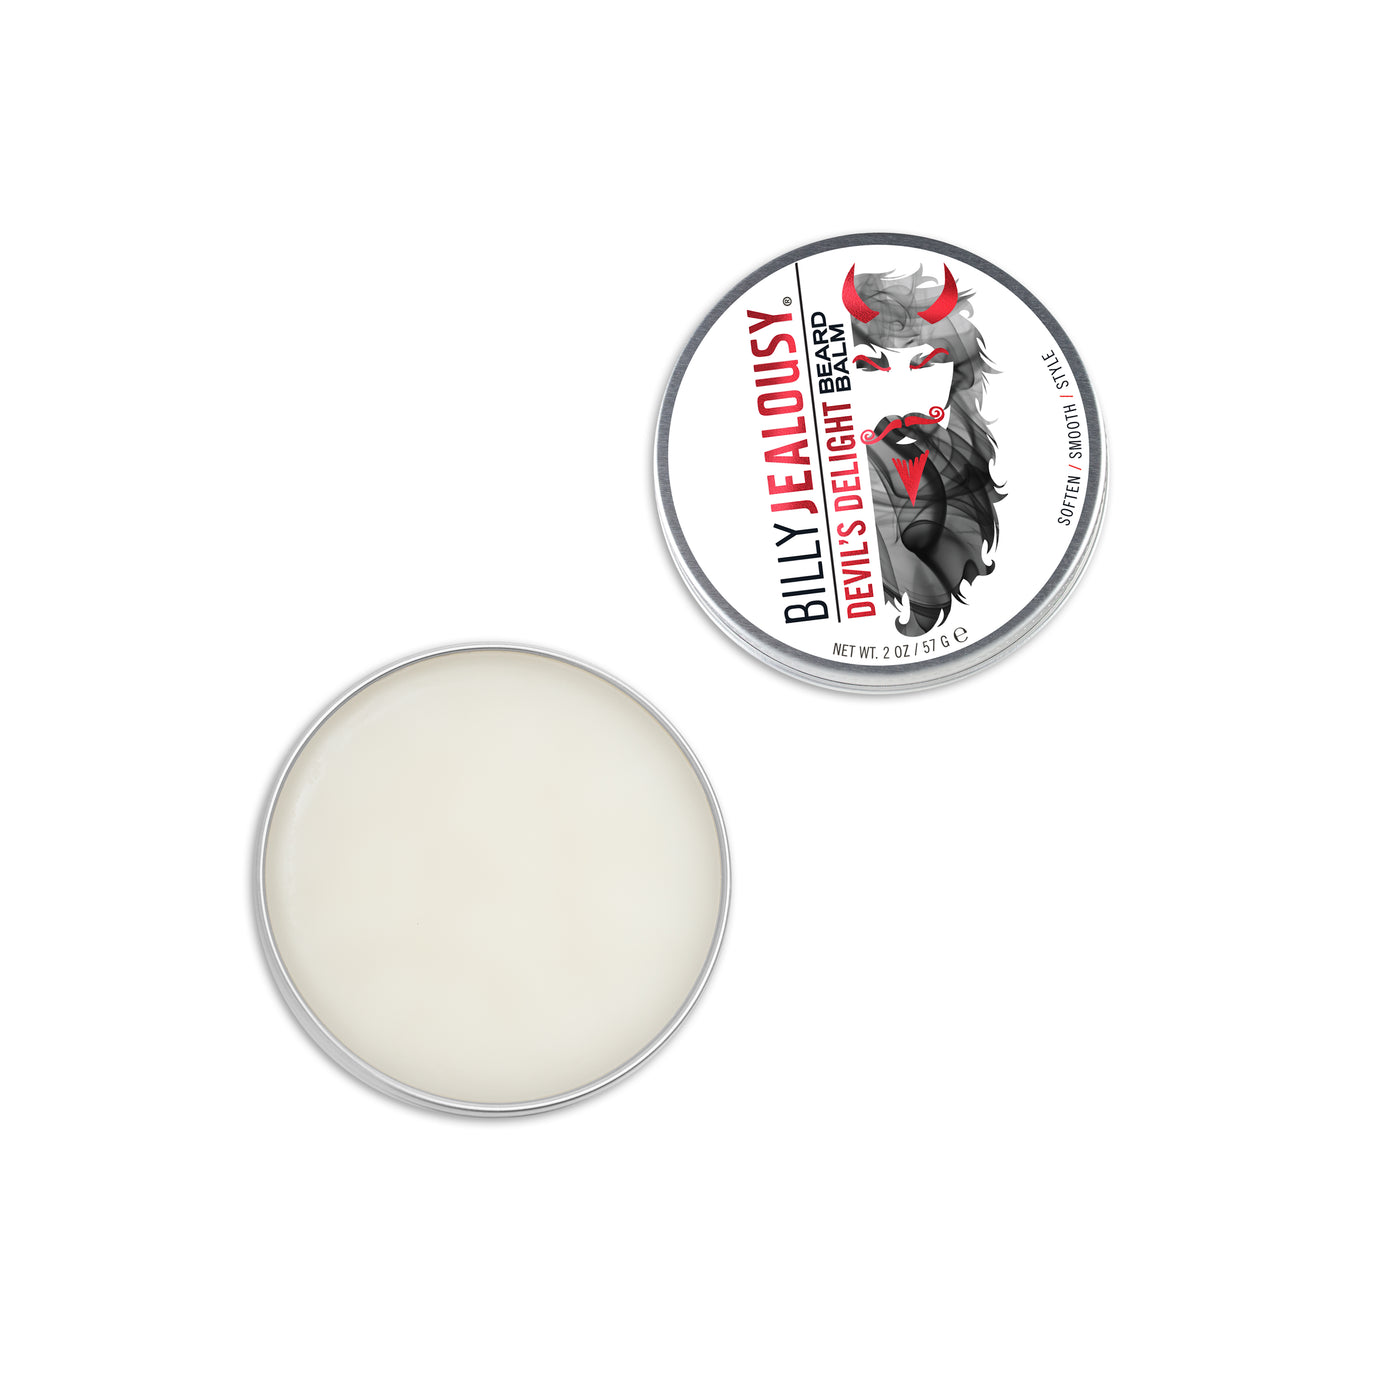 (Product image): open 2oz aluminum tin of Devil's Delight beard balm. Product inside is white and waxy.